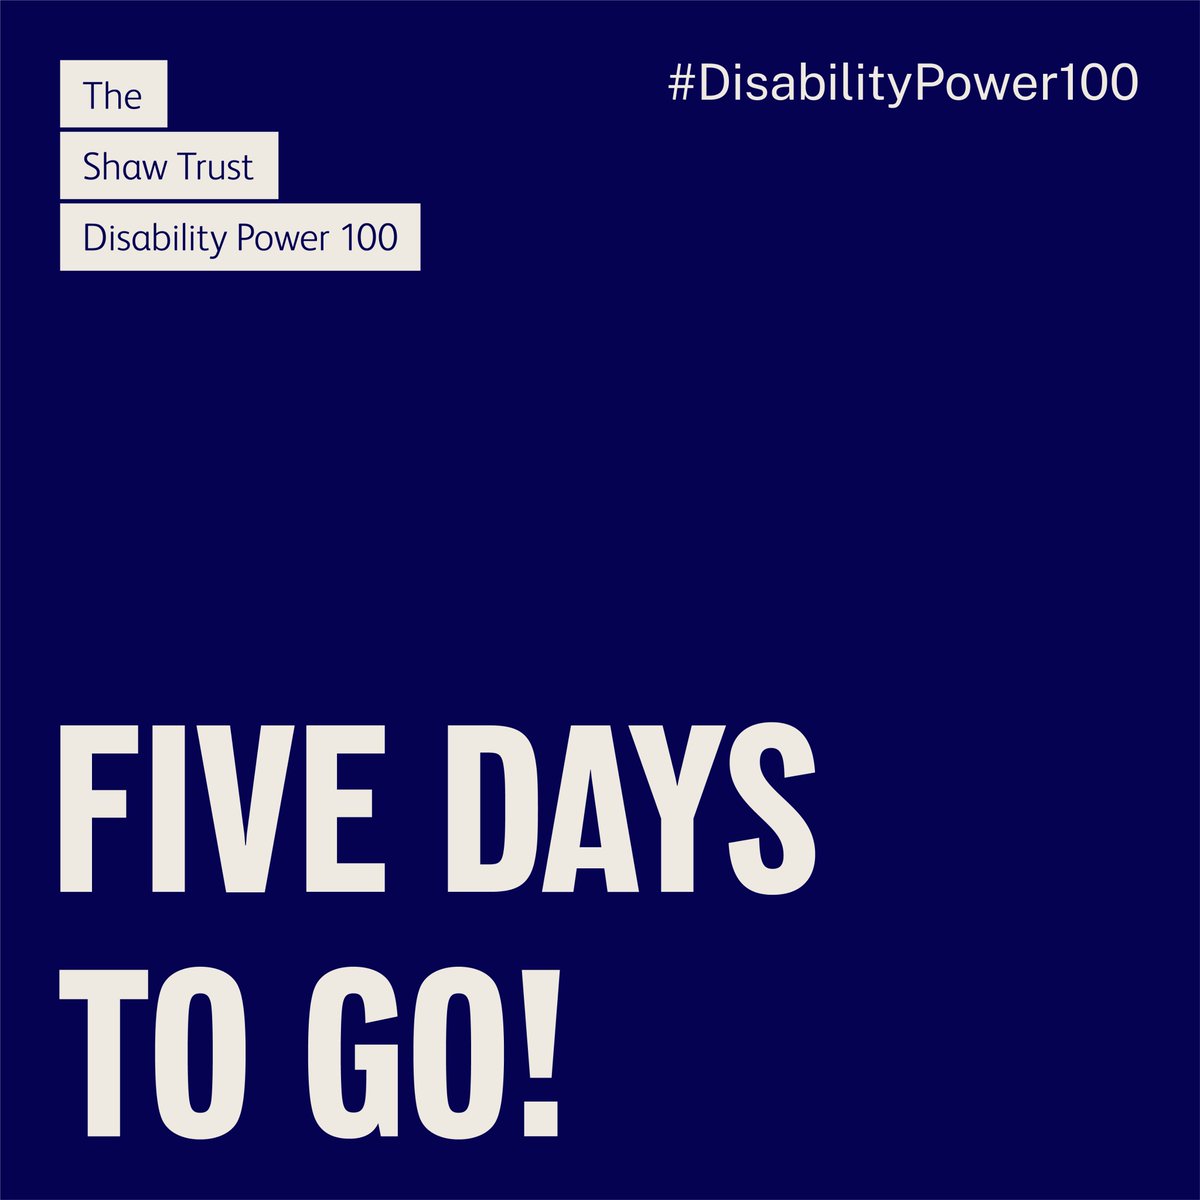 Time is running out! If you think you should be nominated for the Disability Power 100 2024, do not rely on others to make this happen. Nominate yourself today! There is no room for modesty! Nominate now: bit.ly/3Vg8gz1 #DisabilityPower100 #DemandTheChange